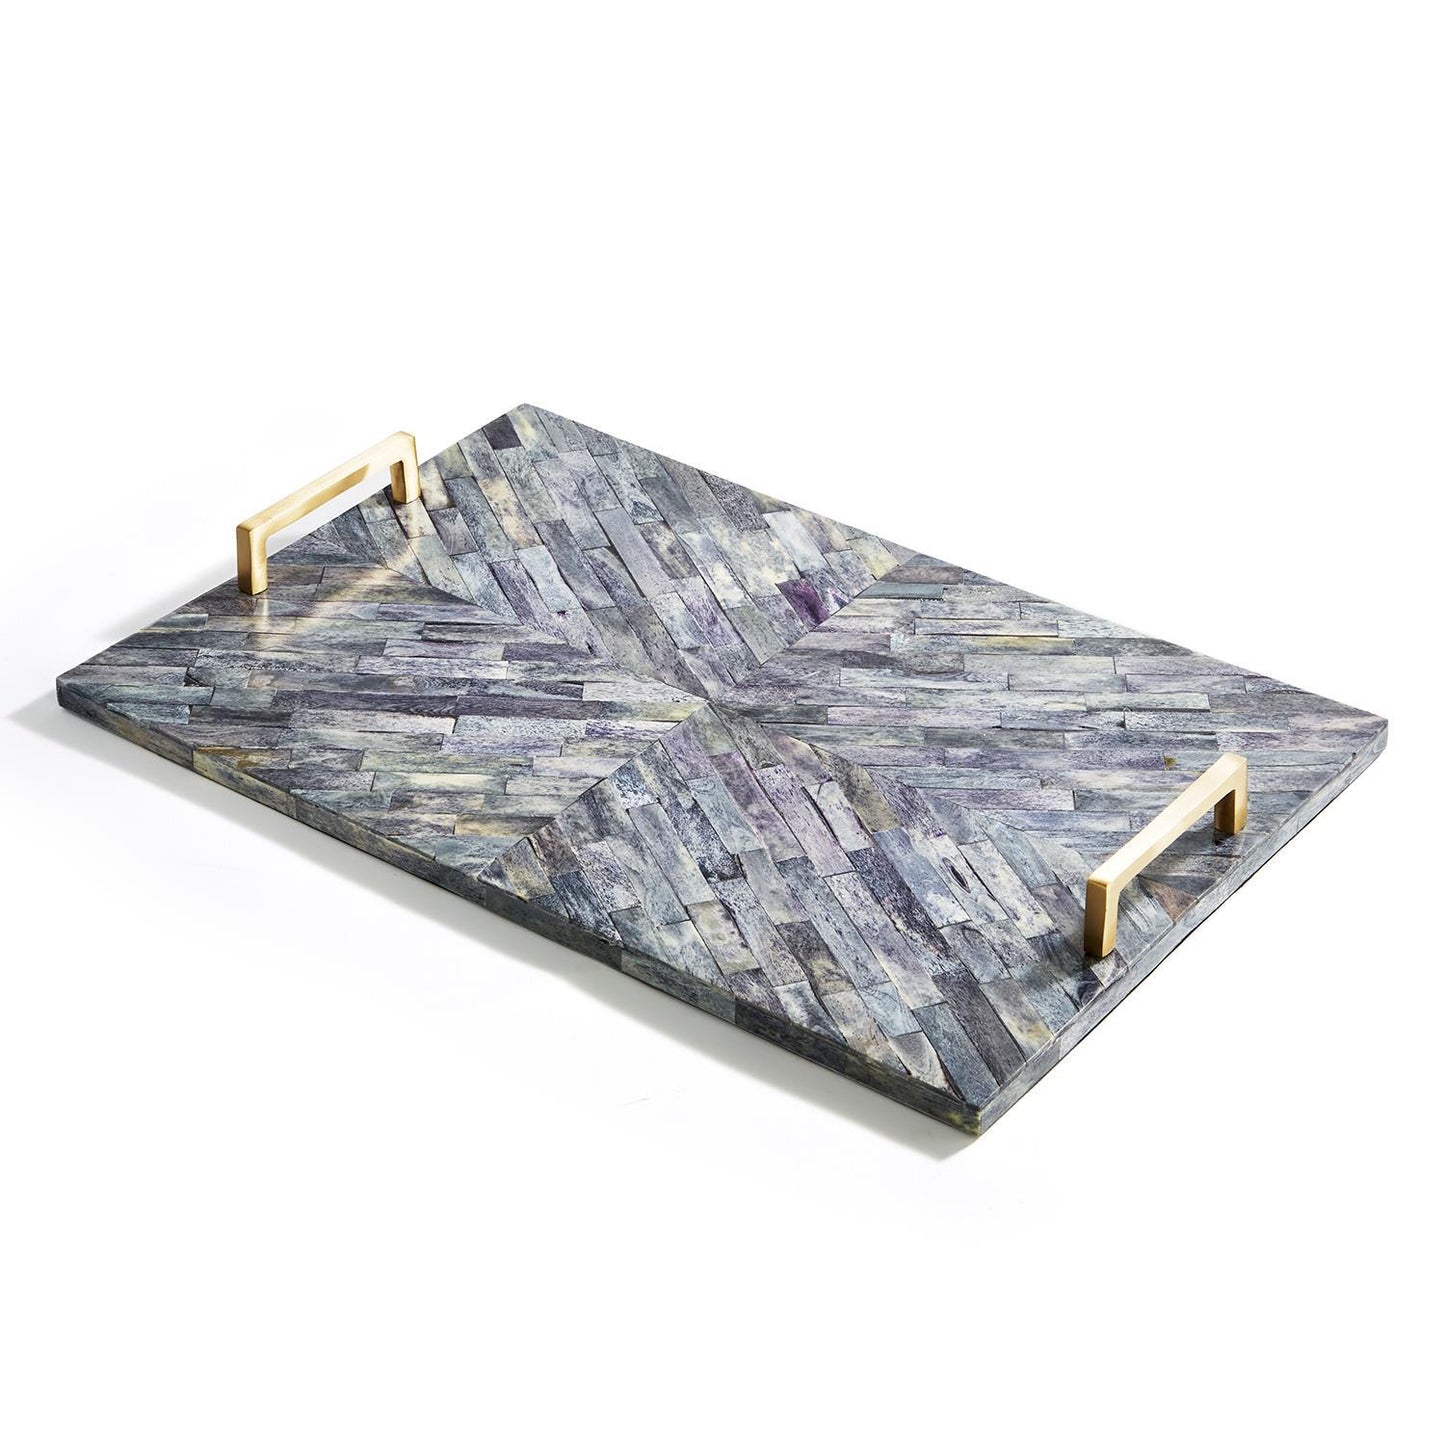 Greystone Mosaic Tile Decorative Tray With Brass Handles By Tozai Home